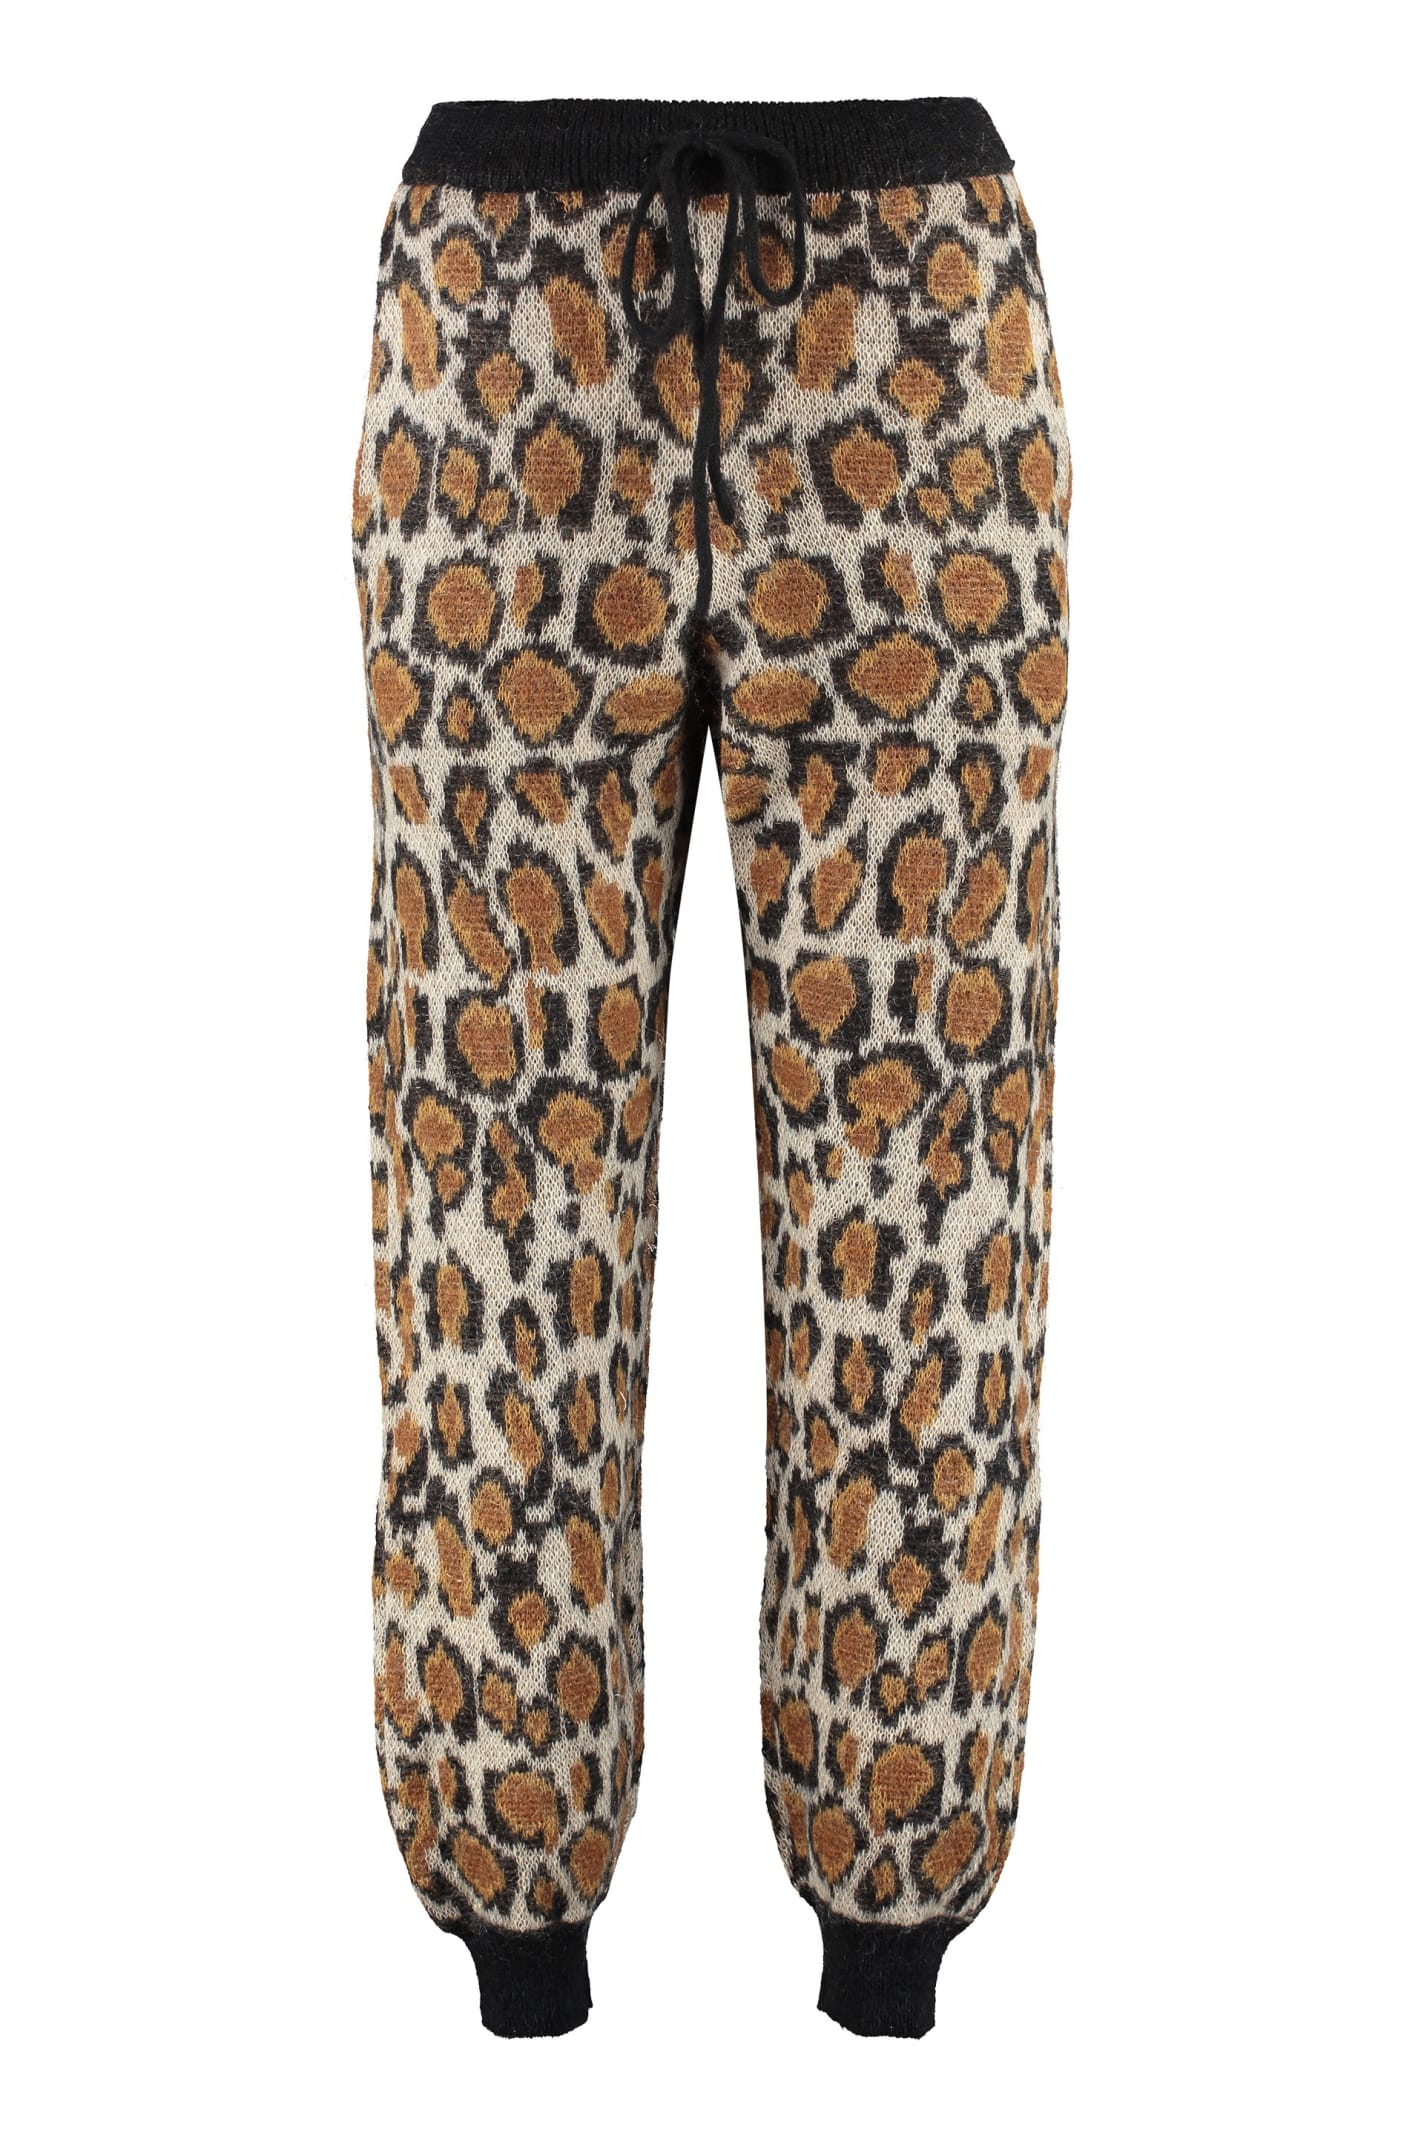 Rotate by Birger Christensen Animalier Knitted Trousers